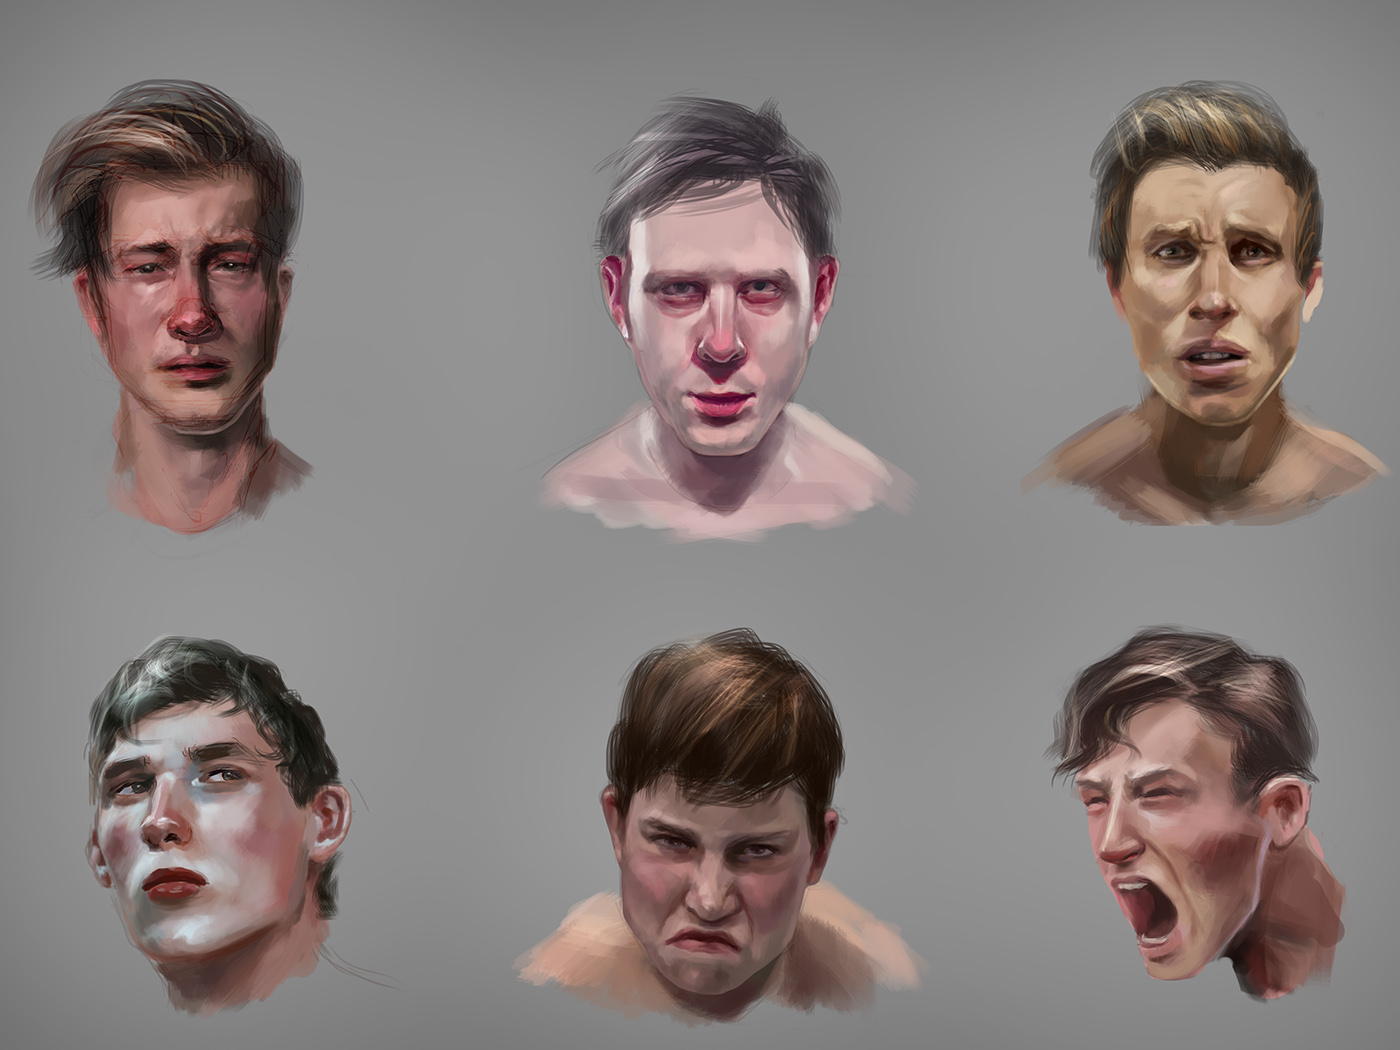 male,man,emotions,expressions,portrait,skin,faces,Иллюстрация,Цифровое иску...